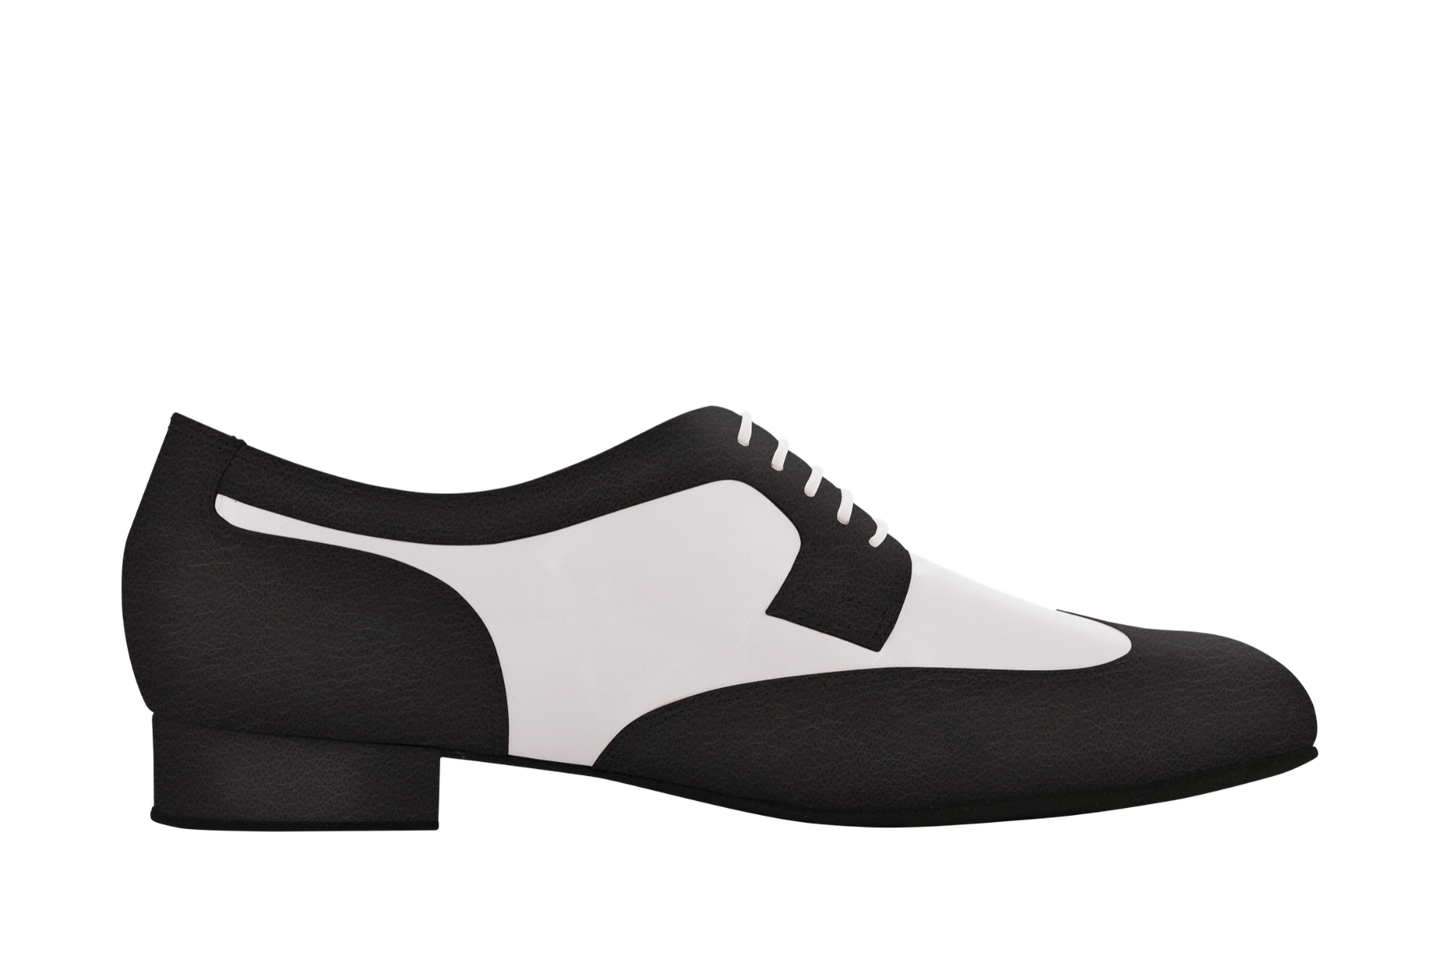 Dance Naturals 125 Castello Men's Ballroom Shoe Available in Black/White Leather or Blue/White Dots Leather